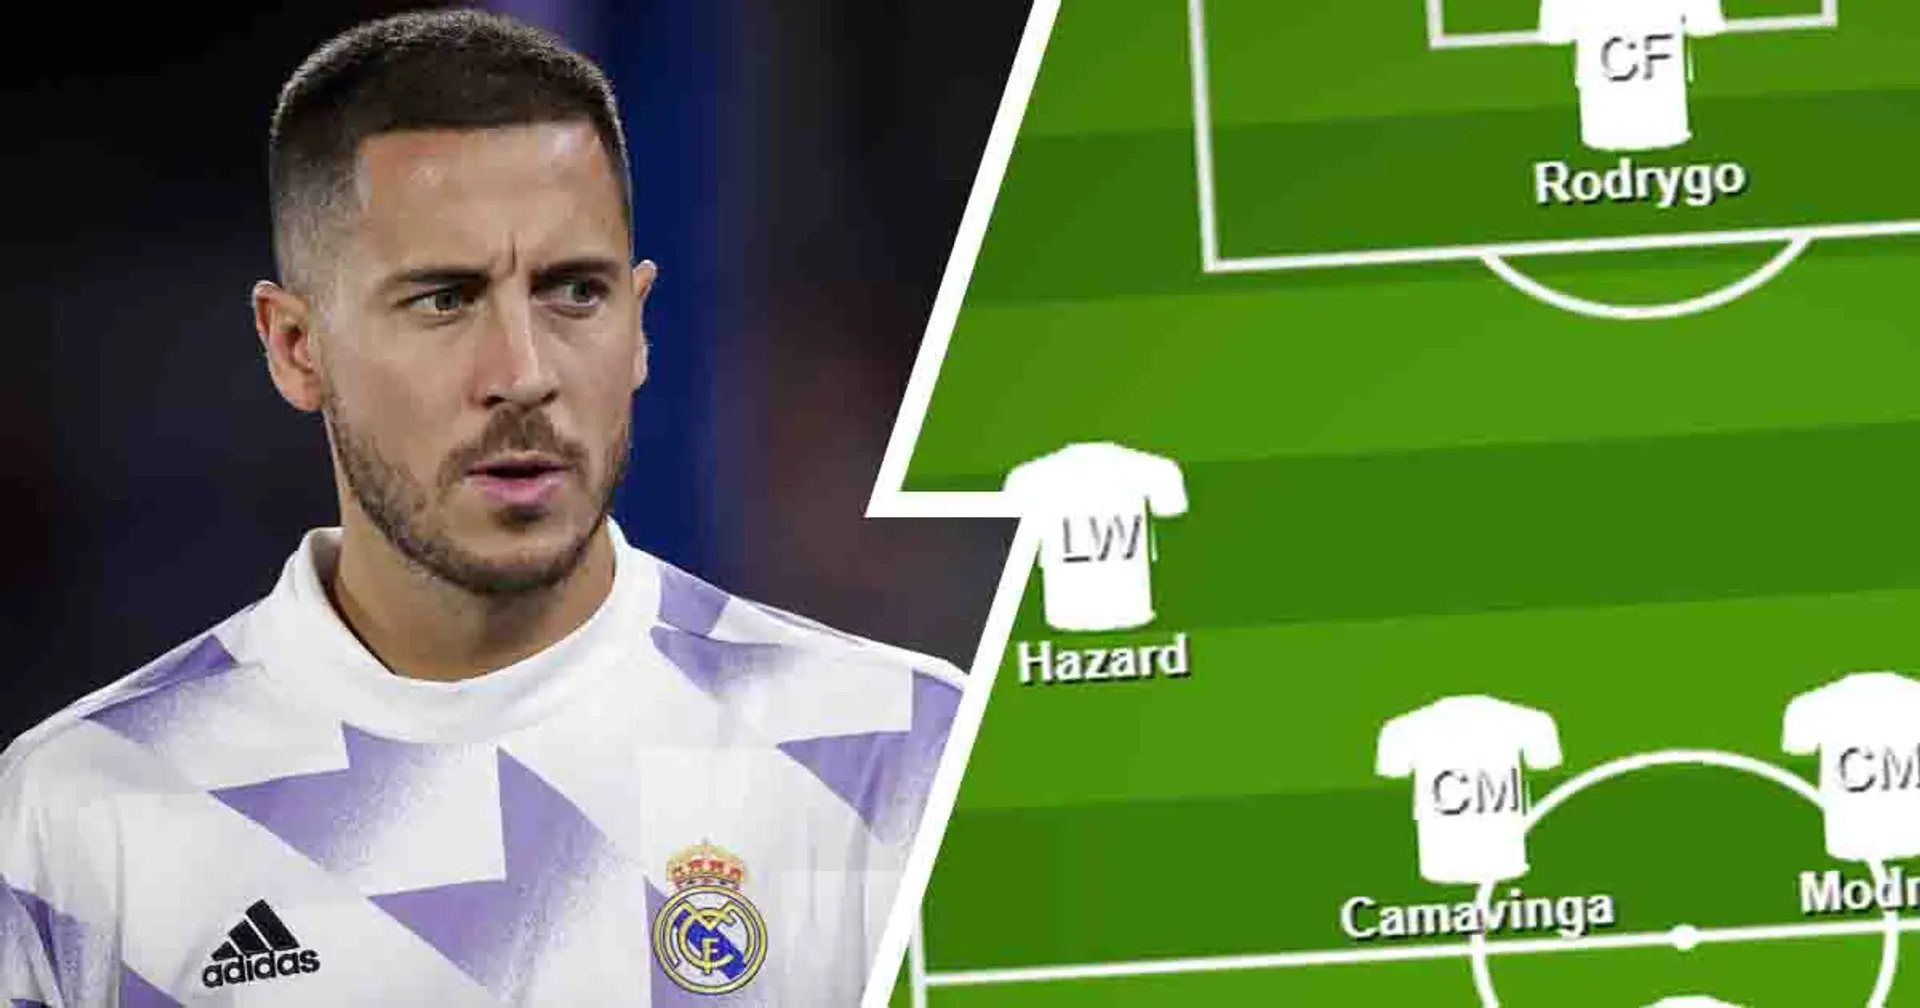 Hazard to start: Team news and probable XIs for Sevilla vs Real Madrid